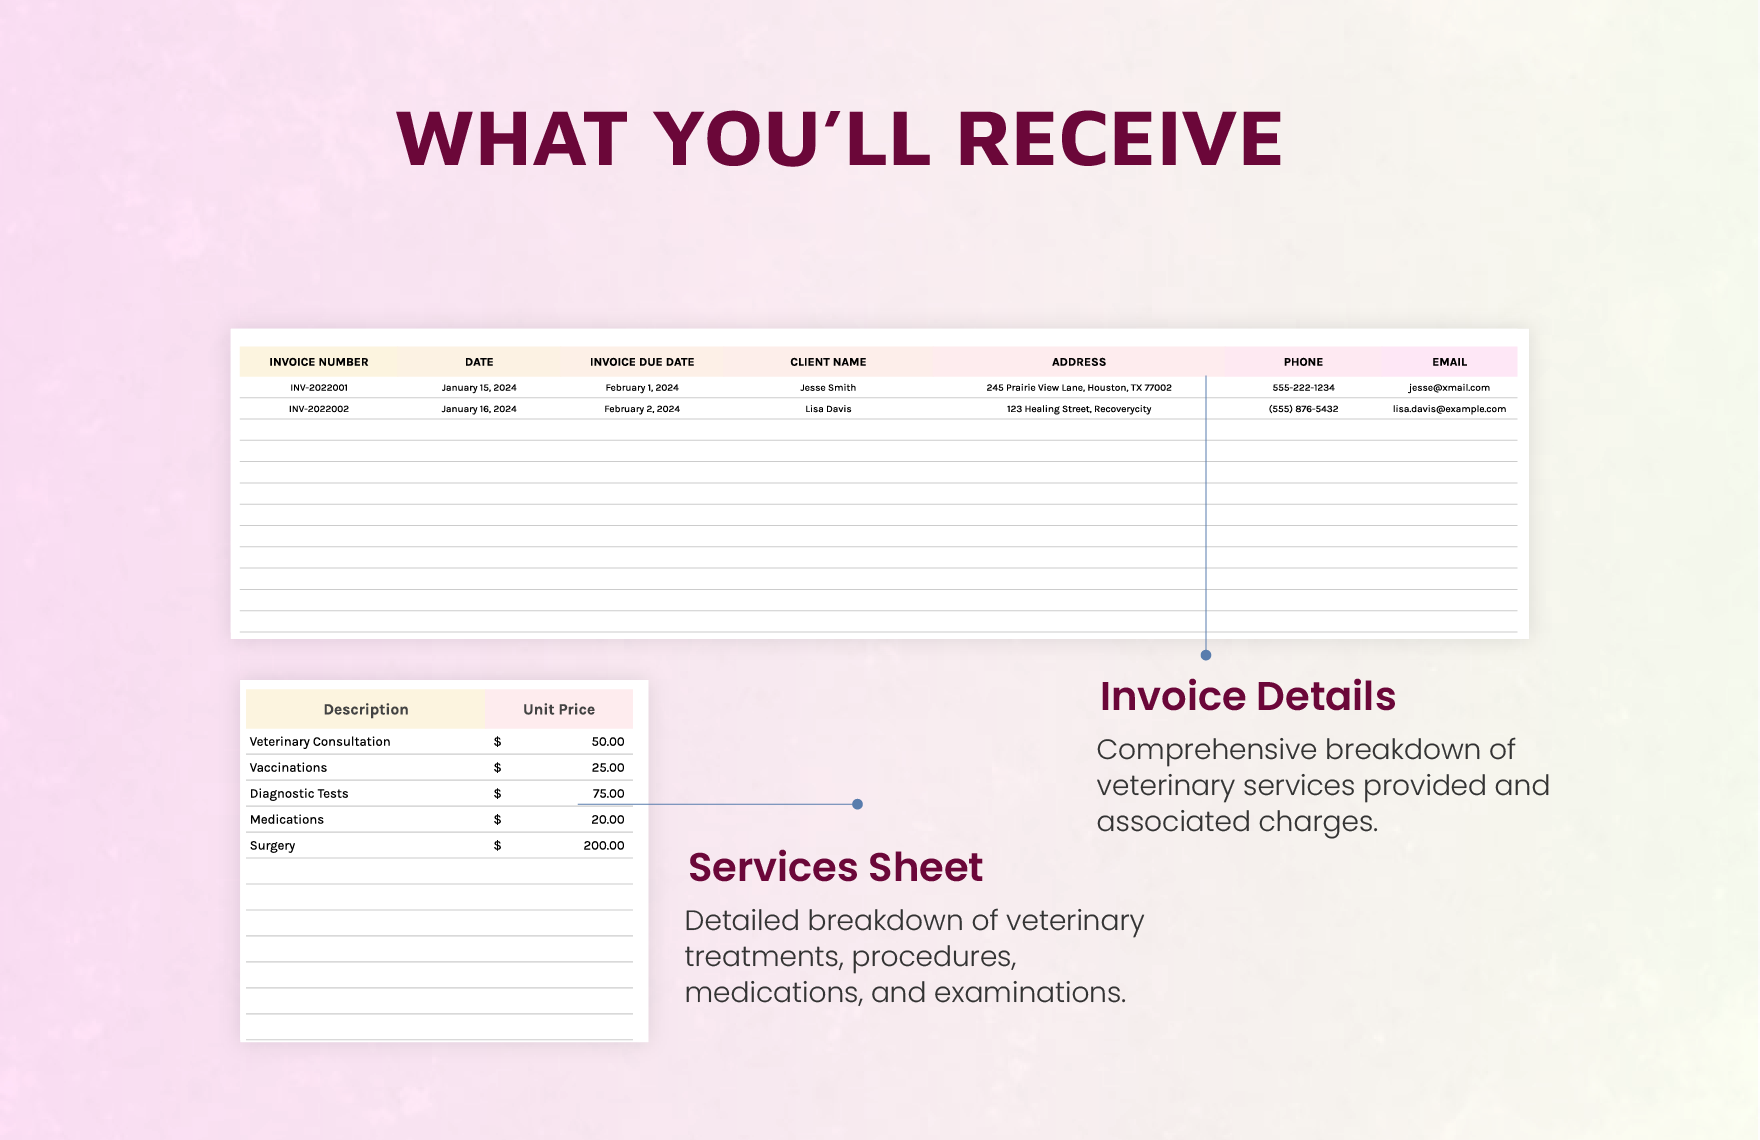 Veterinary Services Invoice Template